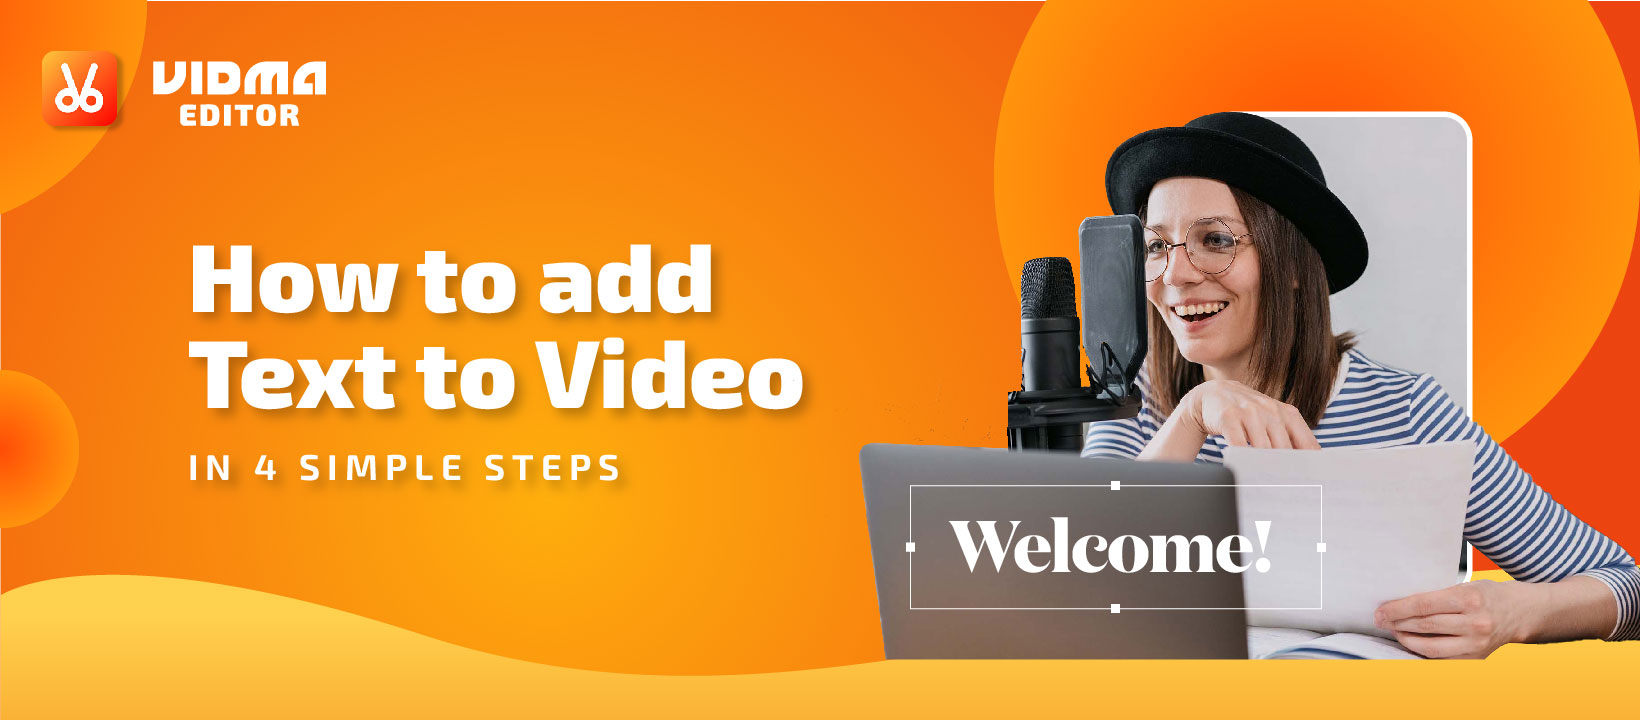 How to Add Text to Video in 4 Simple Steps?